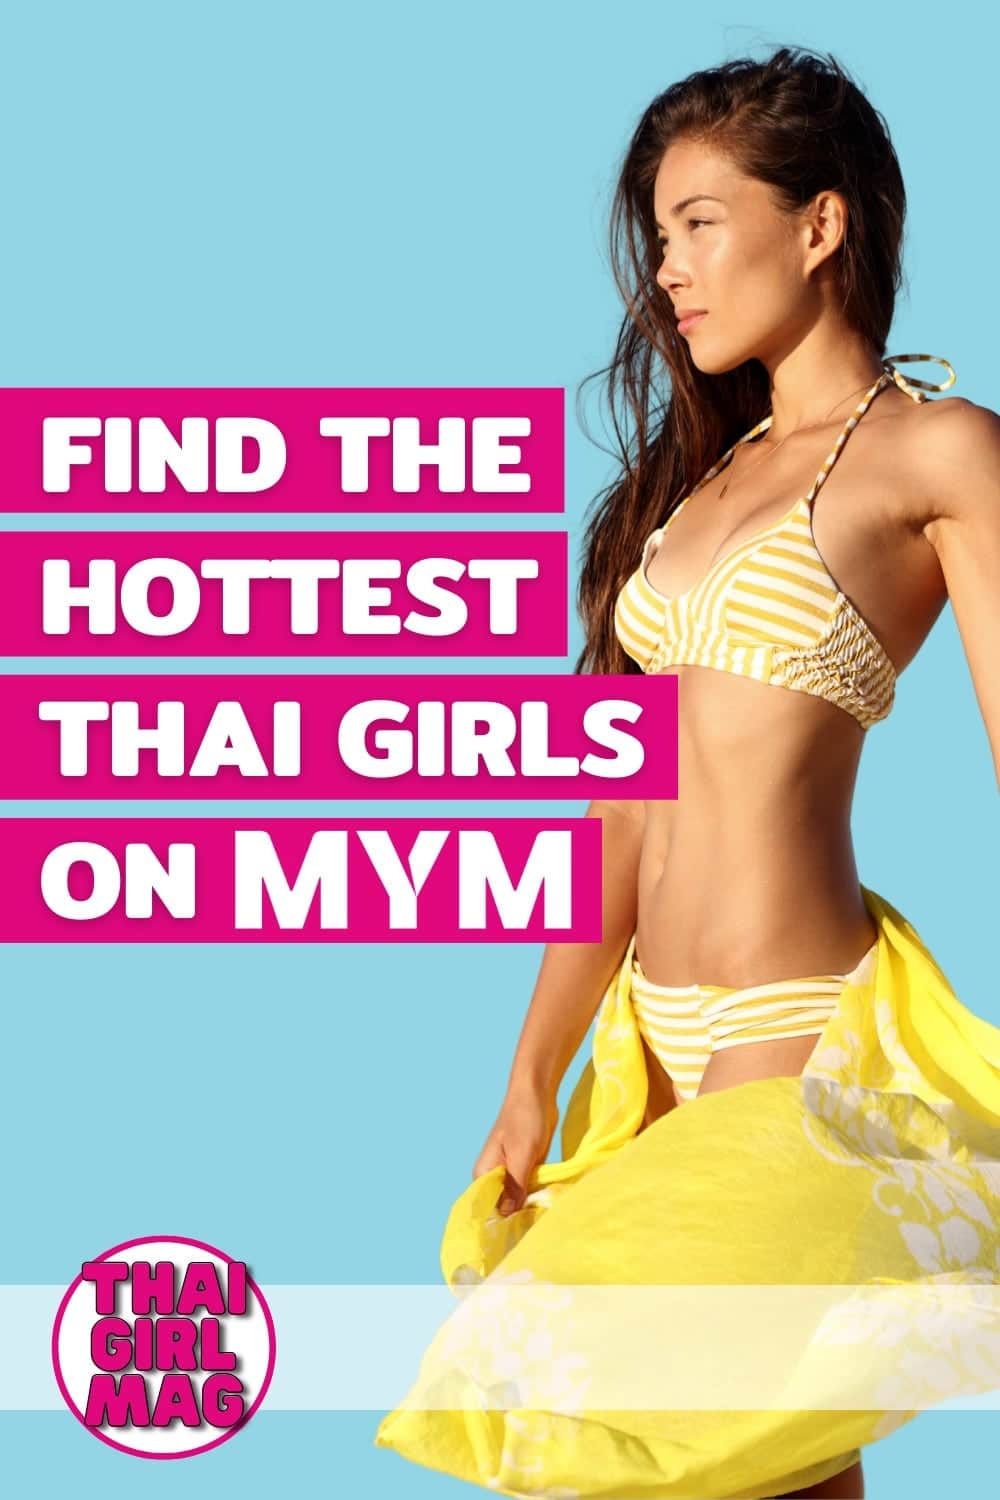 poster for Thai Girls on MYM page on Thai Girl Mag